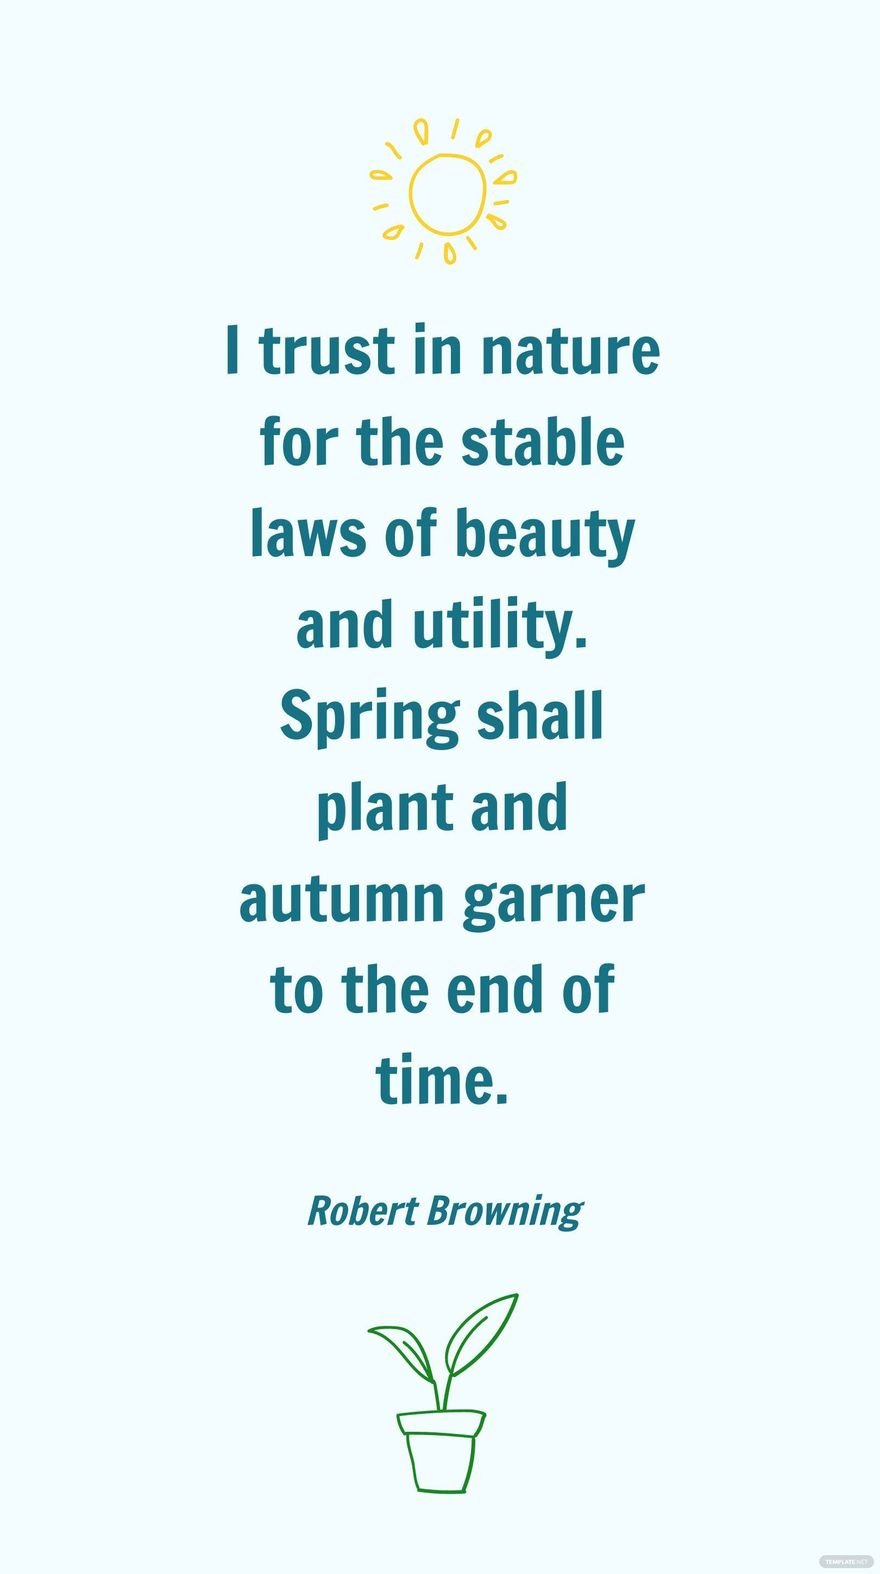 Robert Browning - I trust in nature for the stable laws of beauty and utility. Spring shall plant and autumn garner to the end of time.